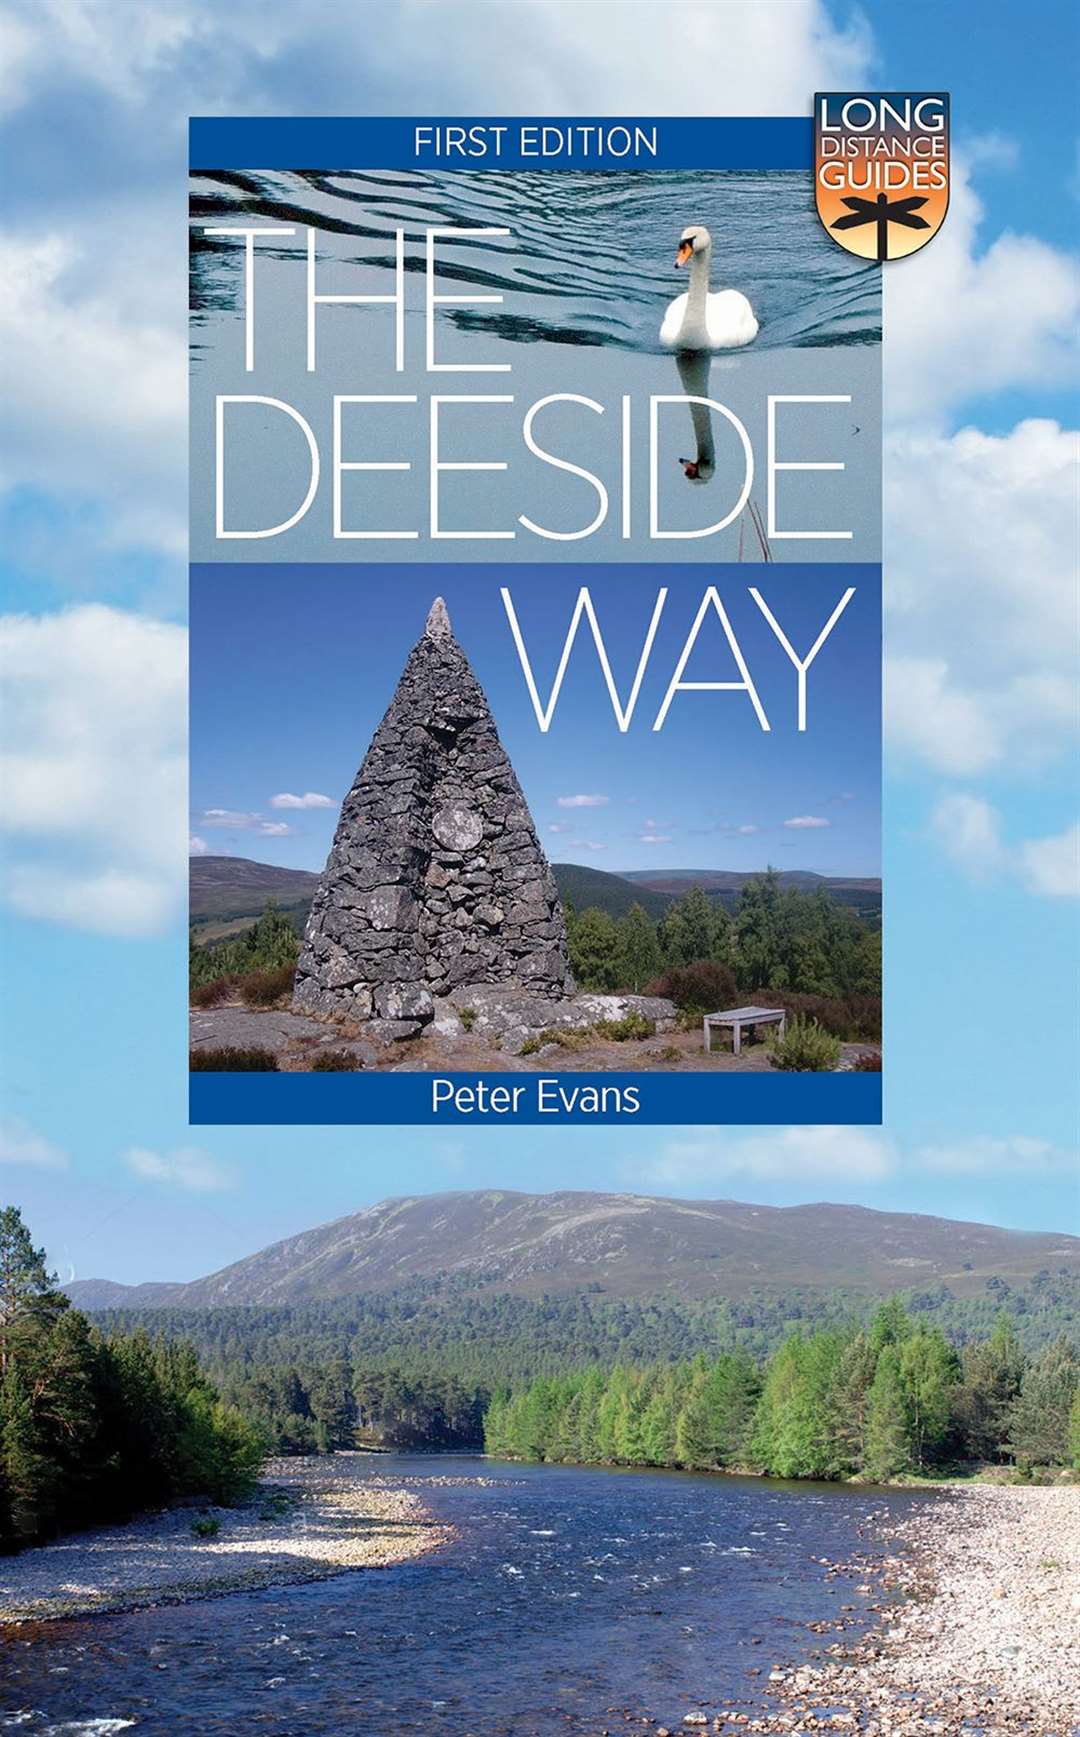 The Deeside Way by Peter Evans is published by Birlinn.